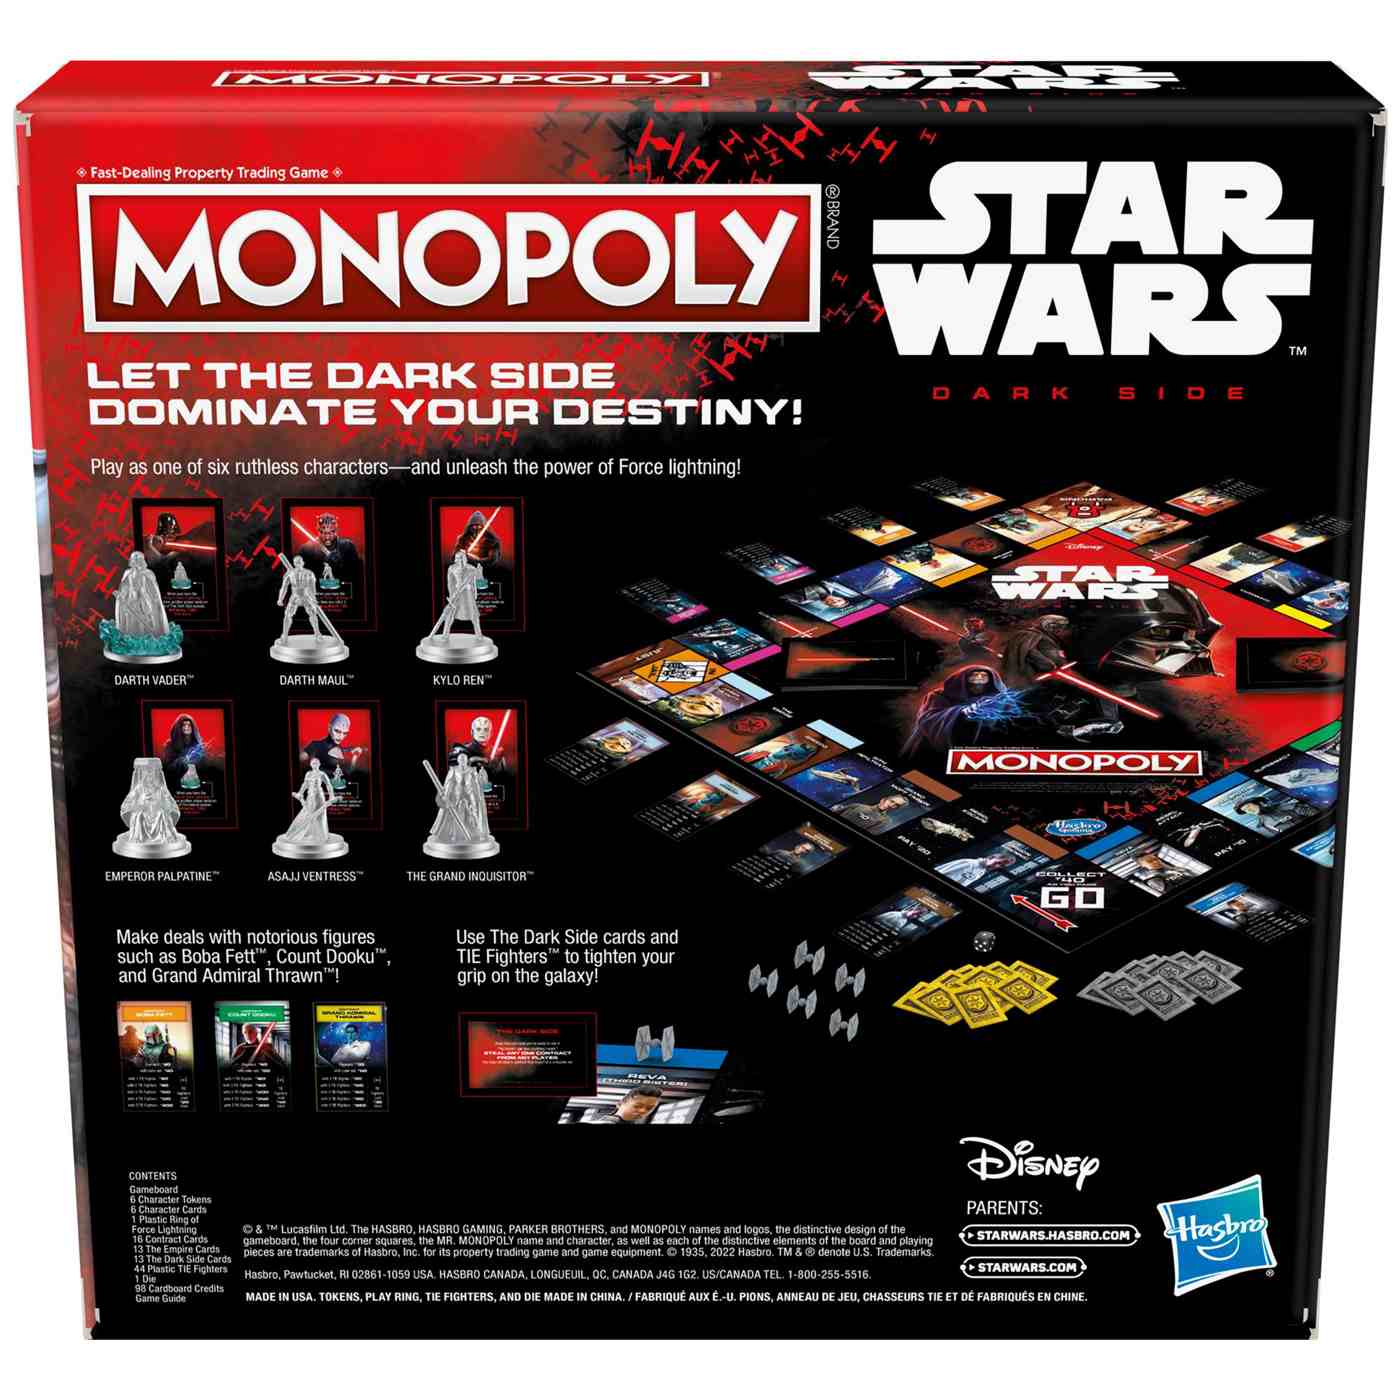 Monopoly Disney Star Wars Dark Side Edition Family Board Game; image 2 of 3